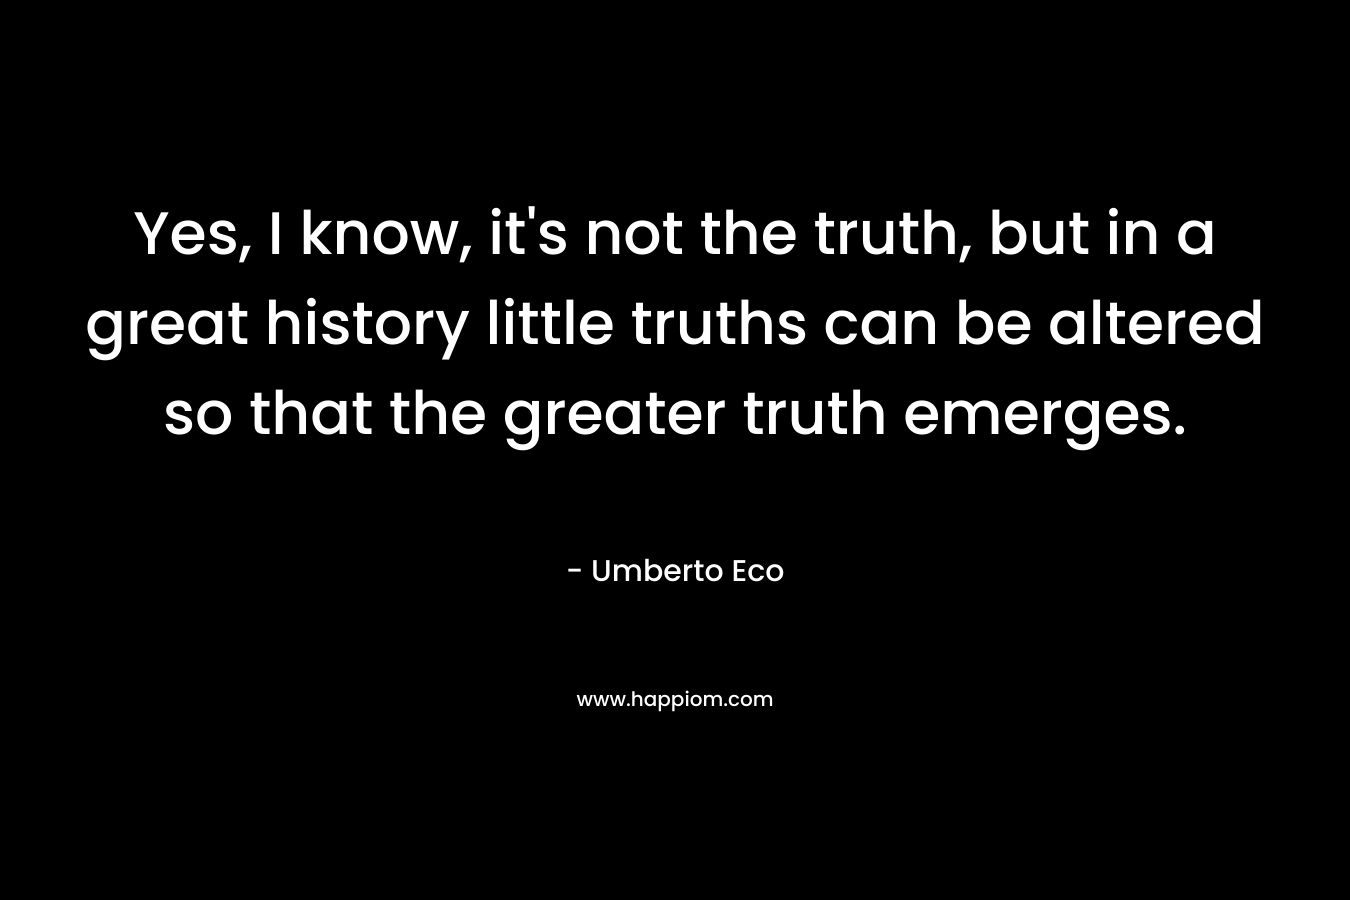 Yes, I know, it's not the truth, but in a great history little truths can be altered so that the greater truth emerges.